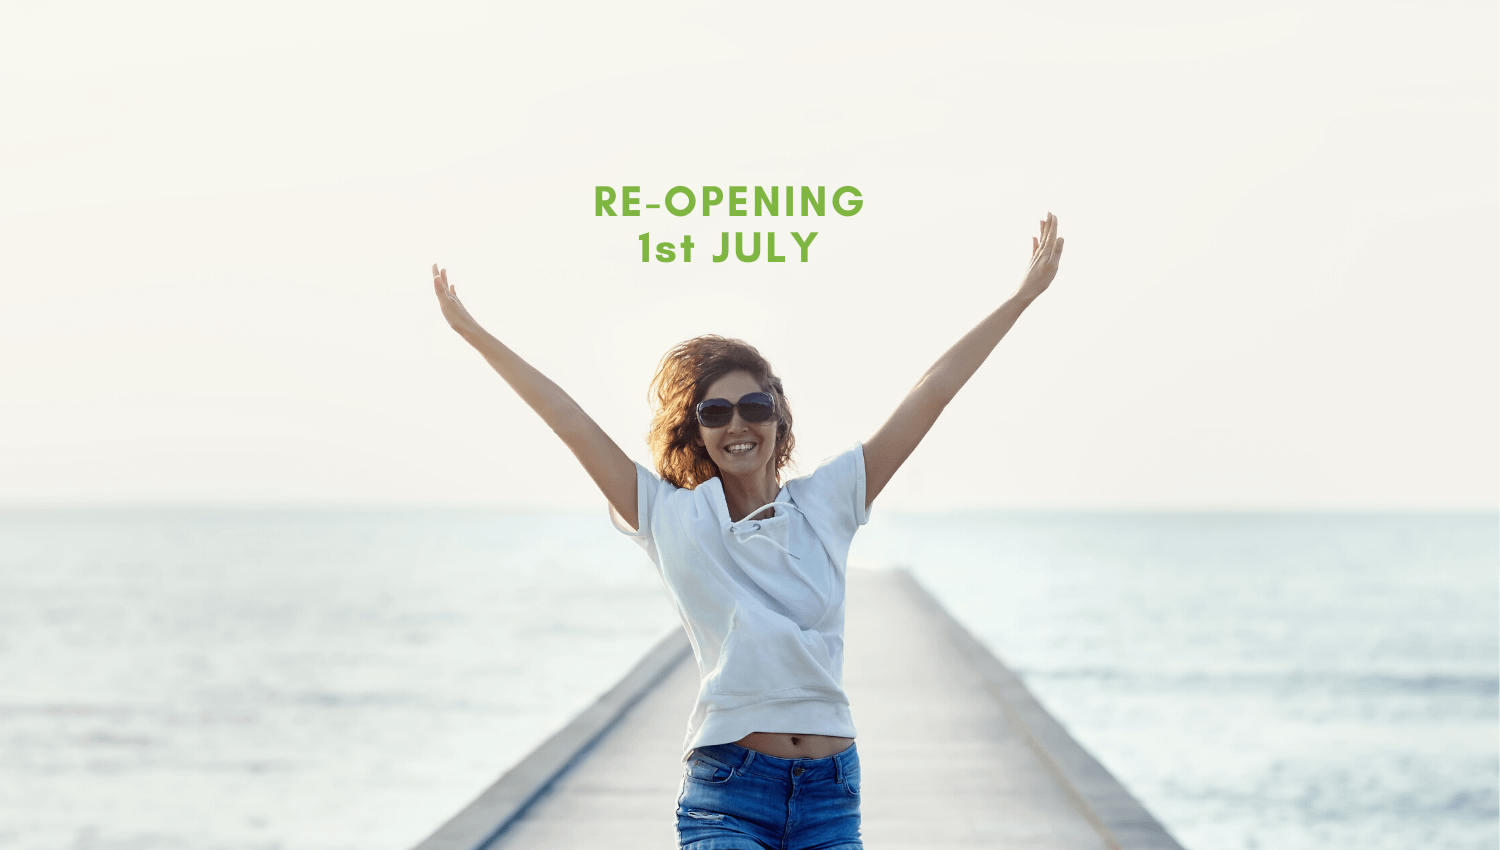 Reopening 1st July